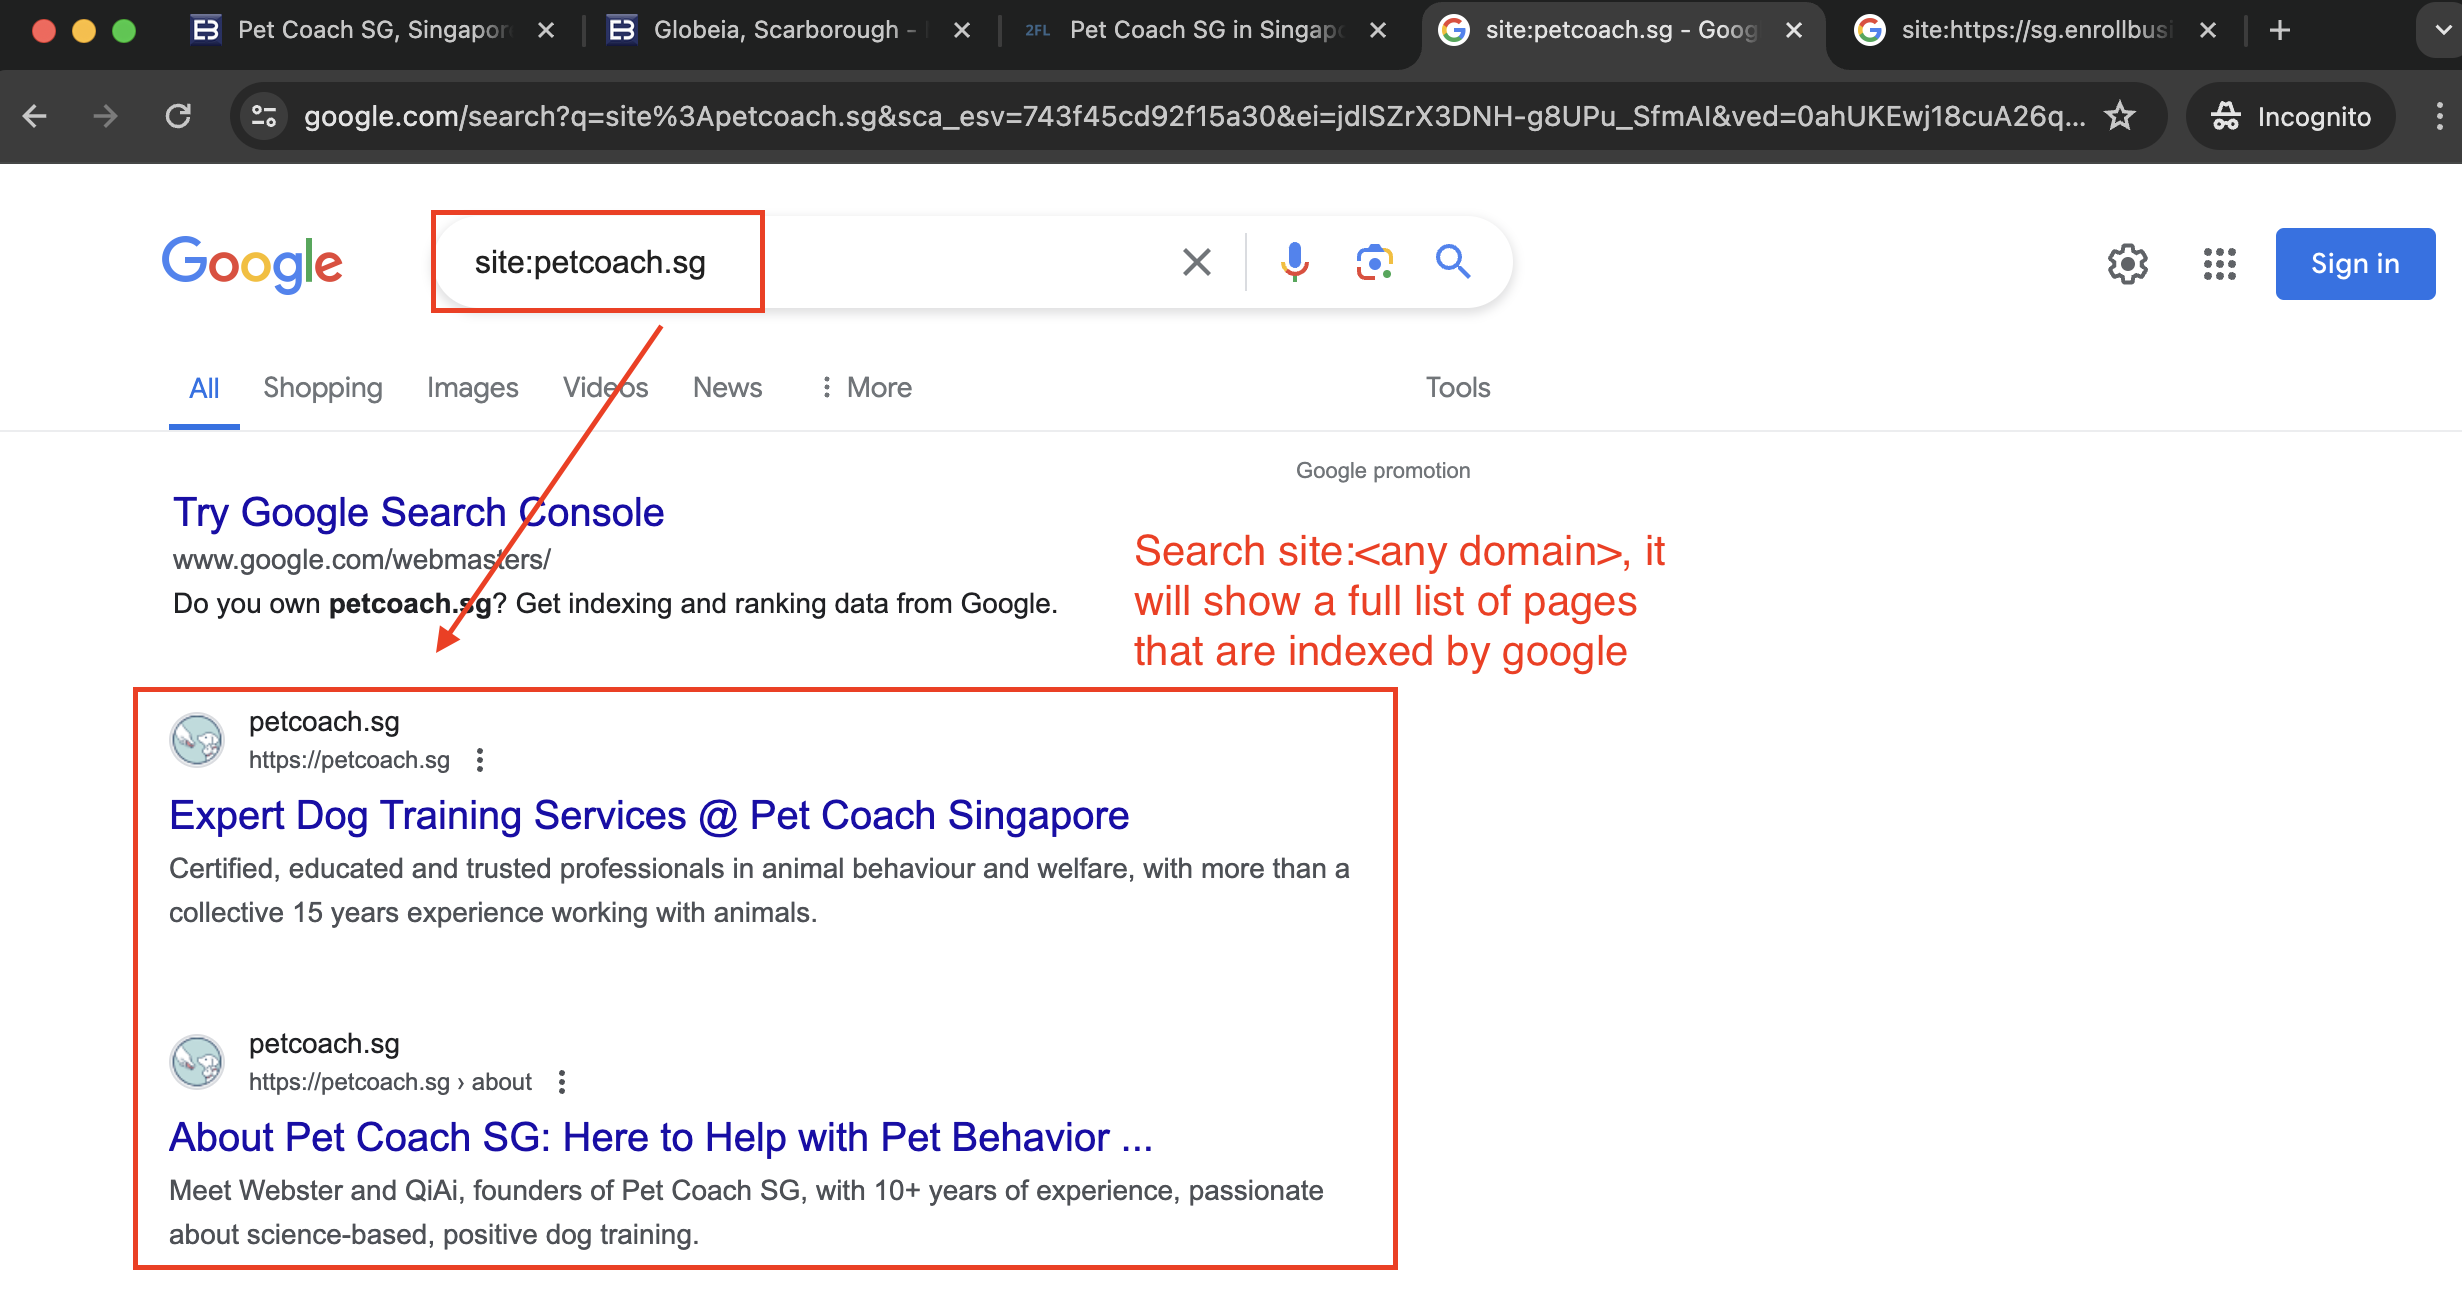 Google Site Search for petcoach.sg shows list of indexed pages by google